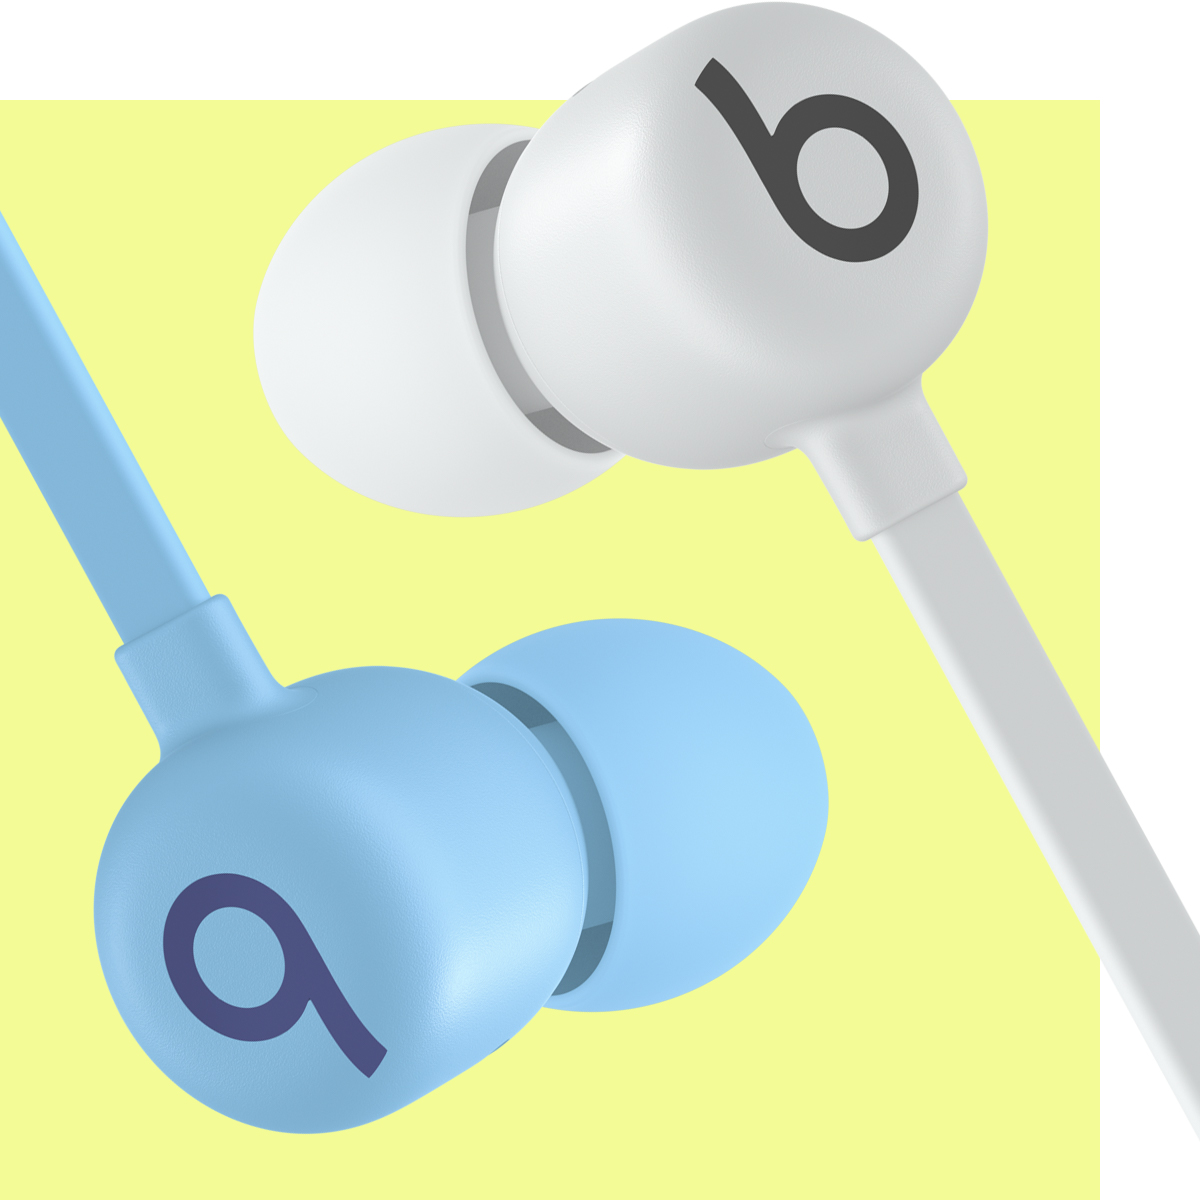 Apple’s $50 Beats Flex wireless earbuds are now available in Flame Blue and Smoke Grey